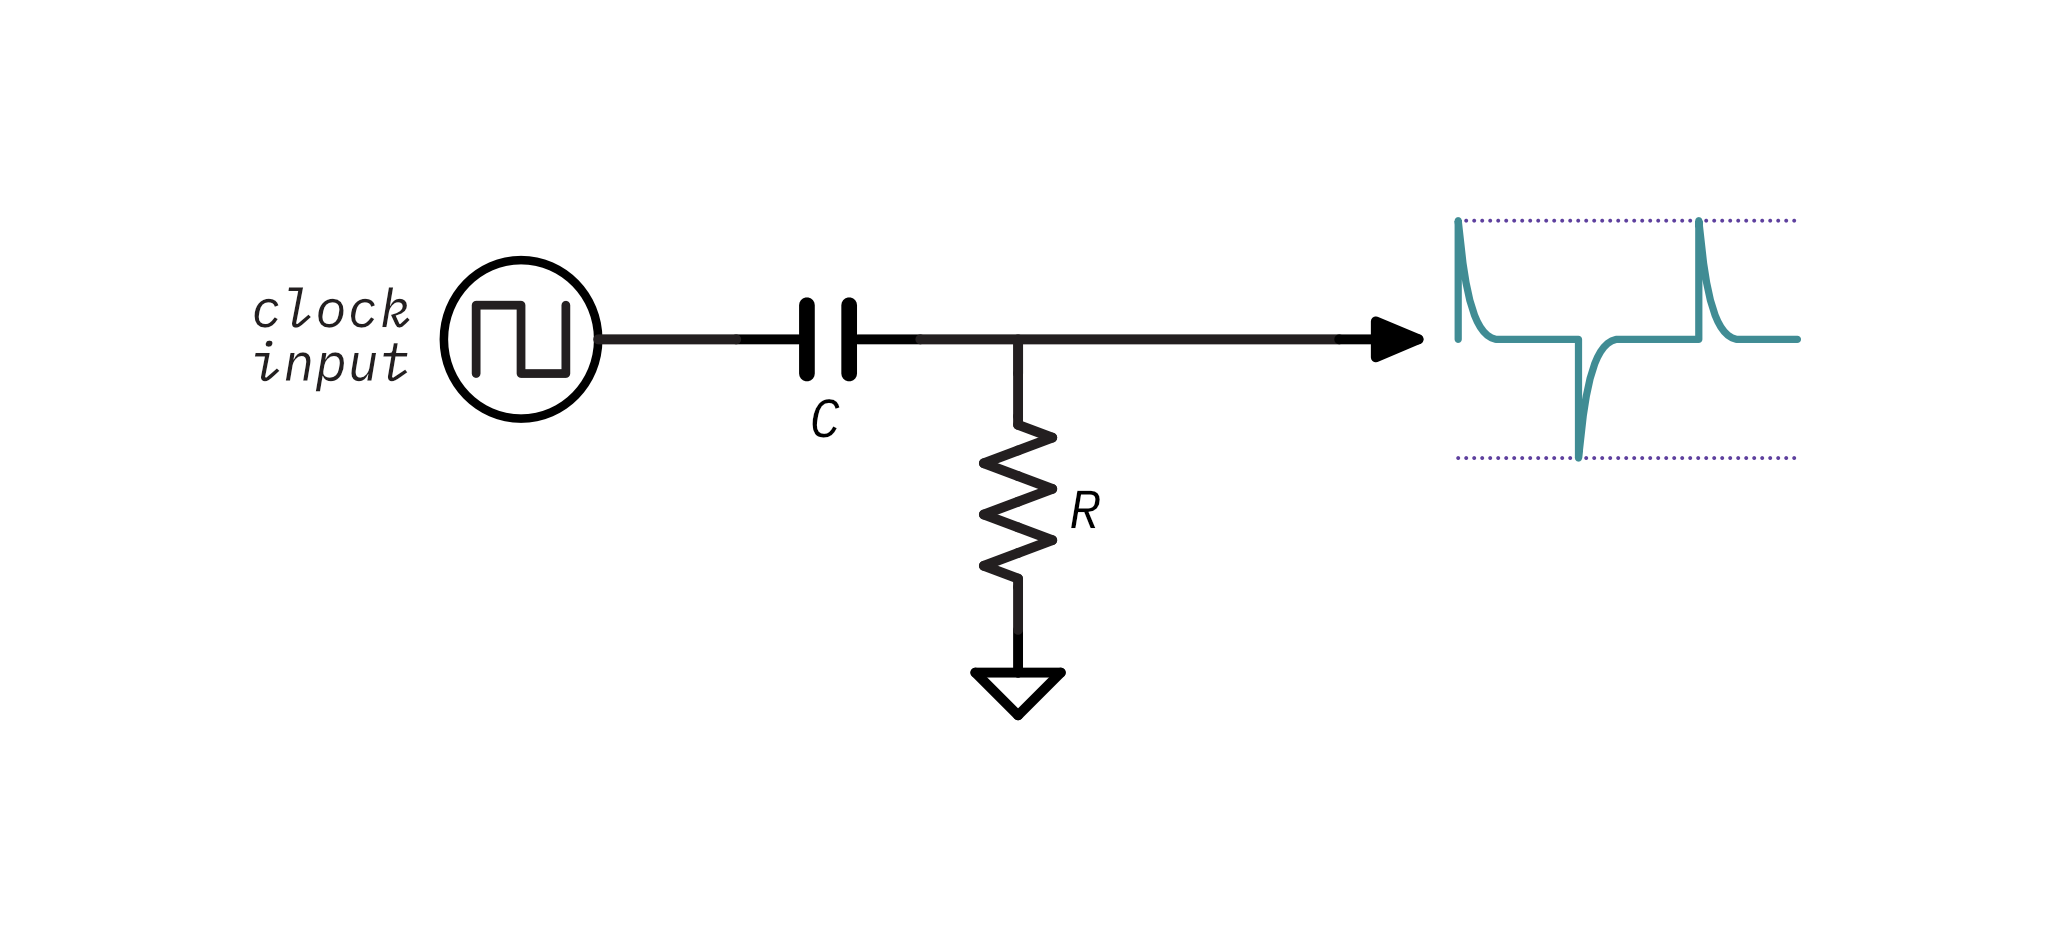 A schematic showing an RC differentiator transforming a clock signal into spikes